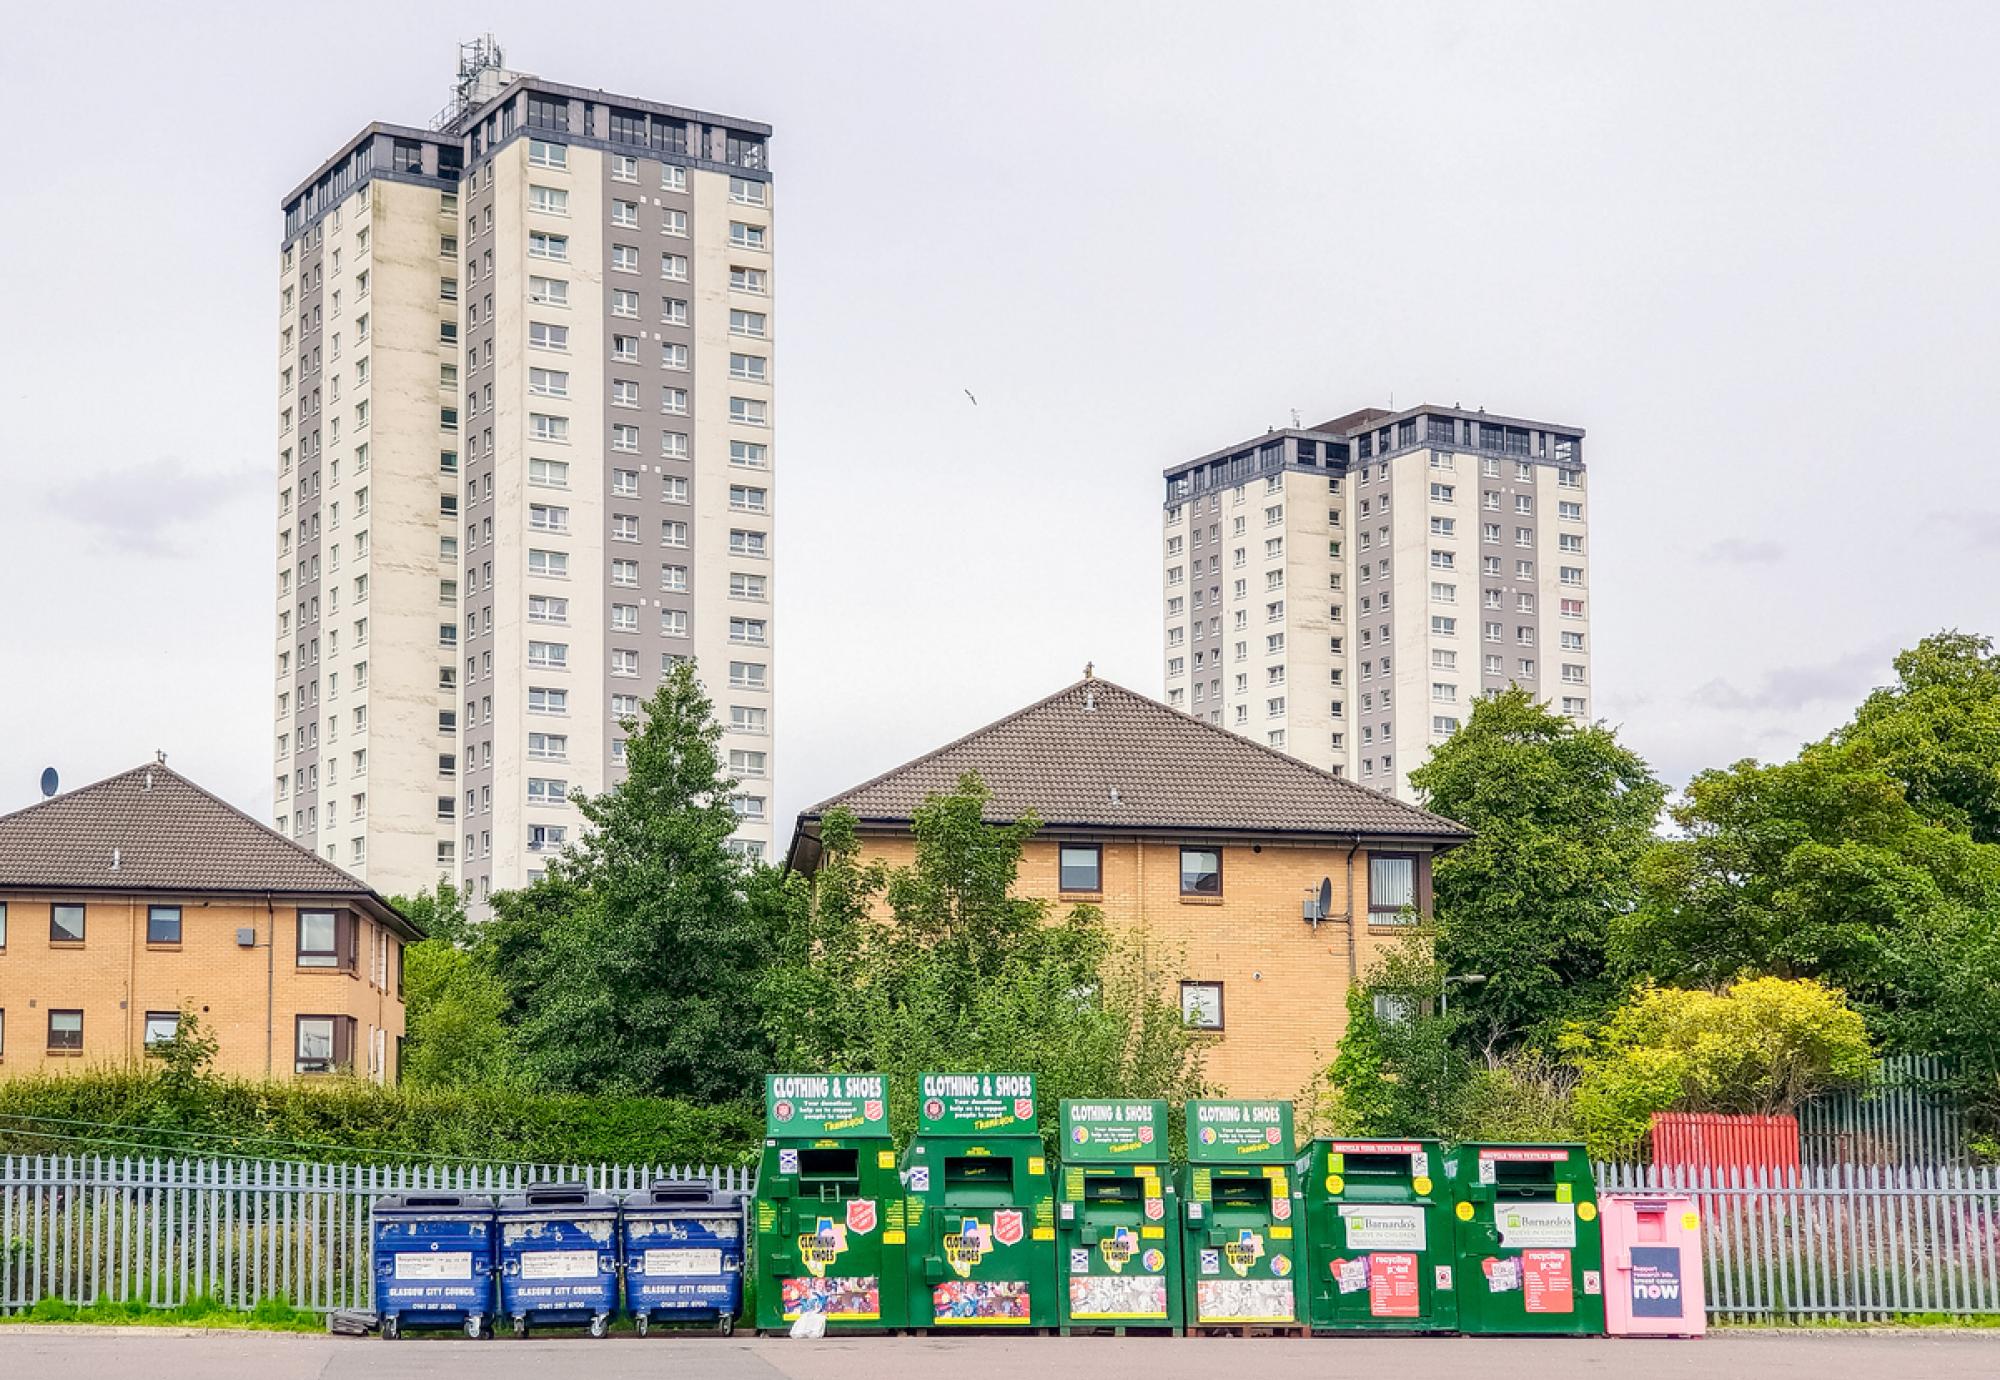 A series of recycling and charity donation containers in the Knightswood area of Glasgow.